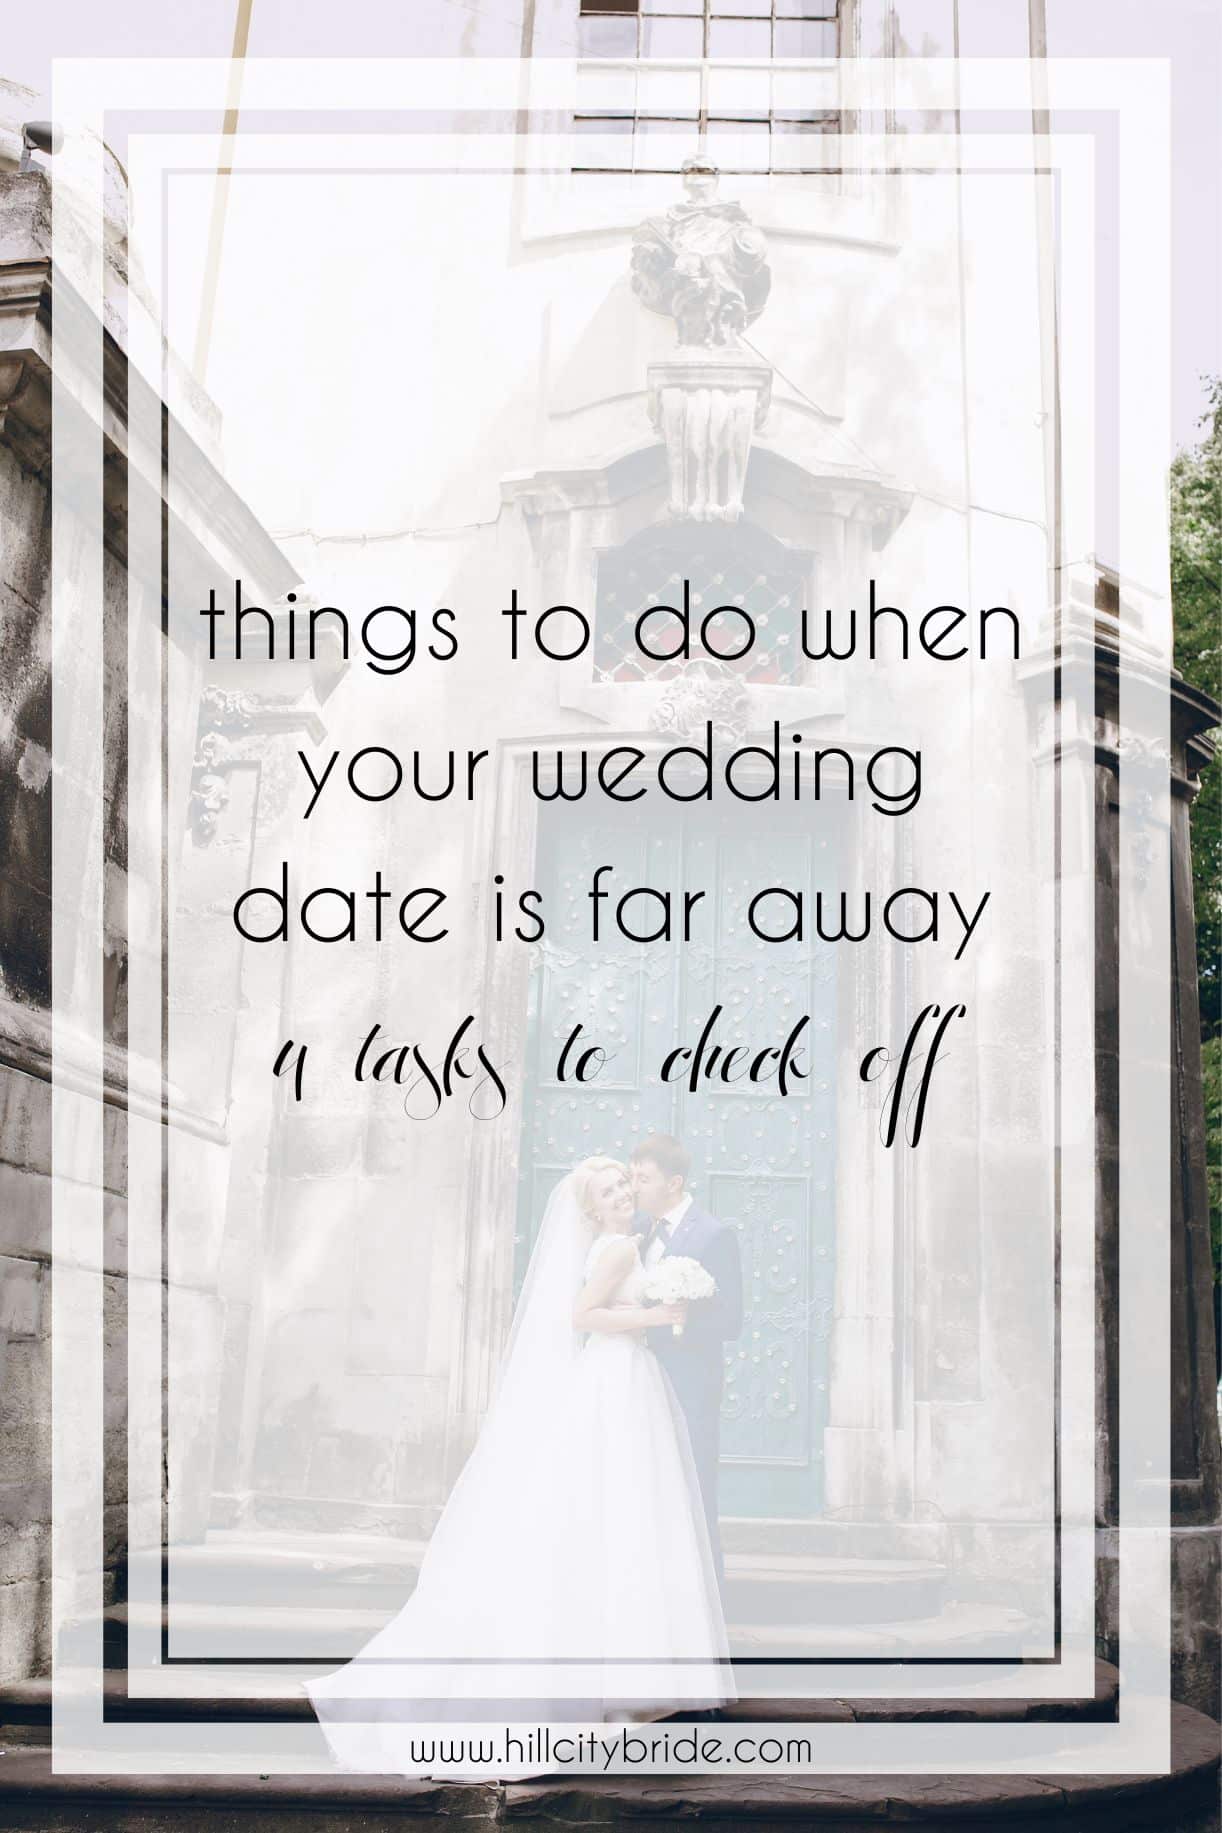 4 Vital Things to Do When Your Wedding Is Booked Far in Advance